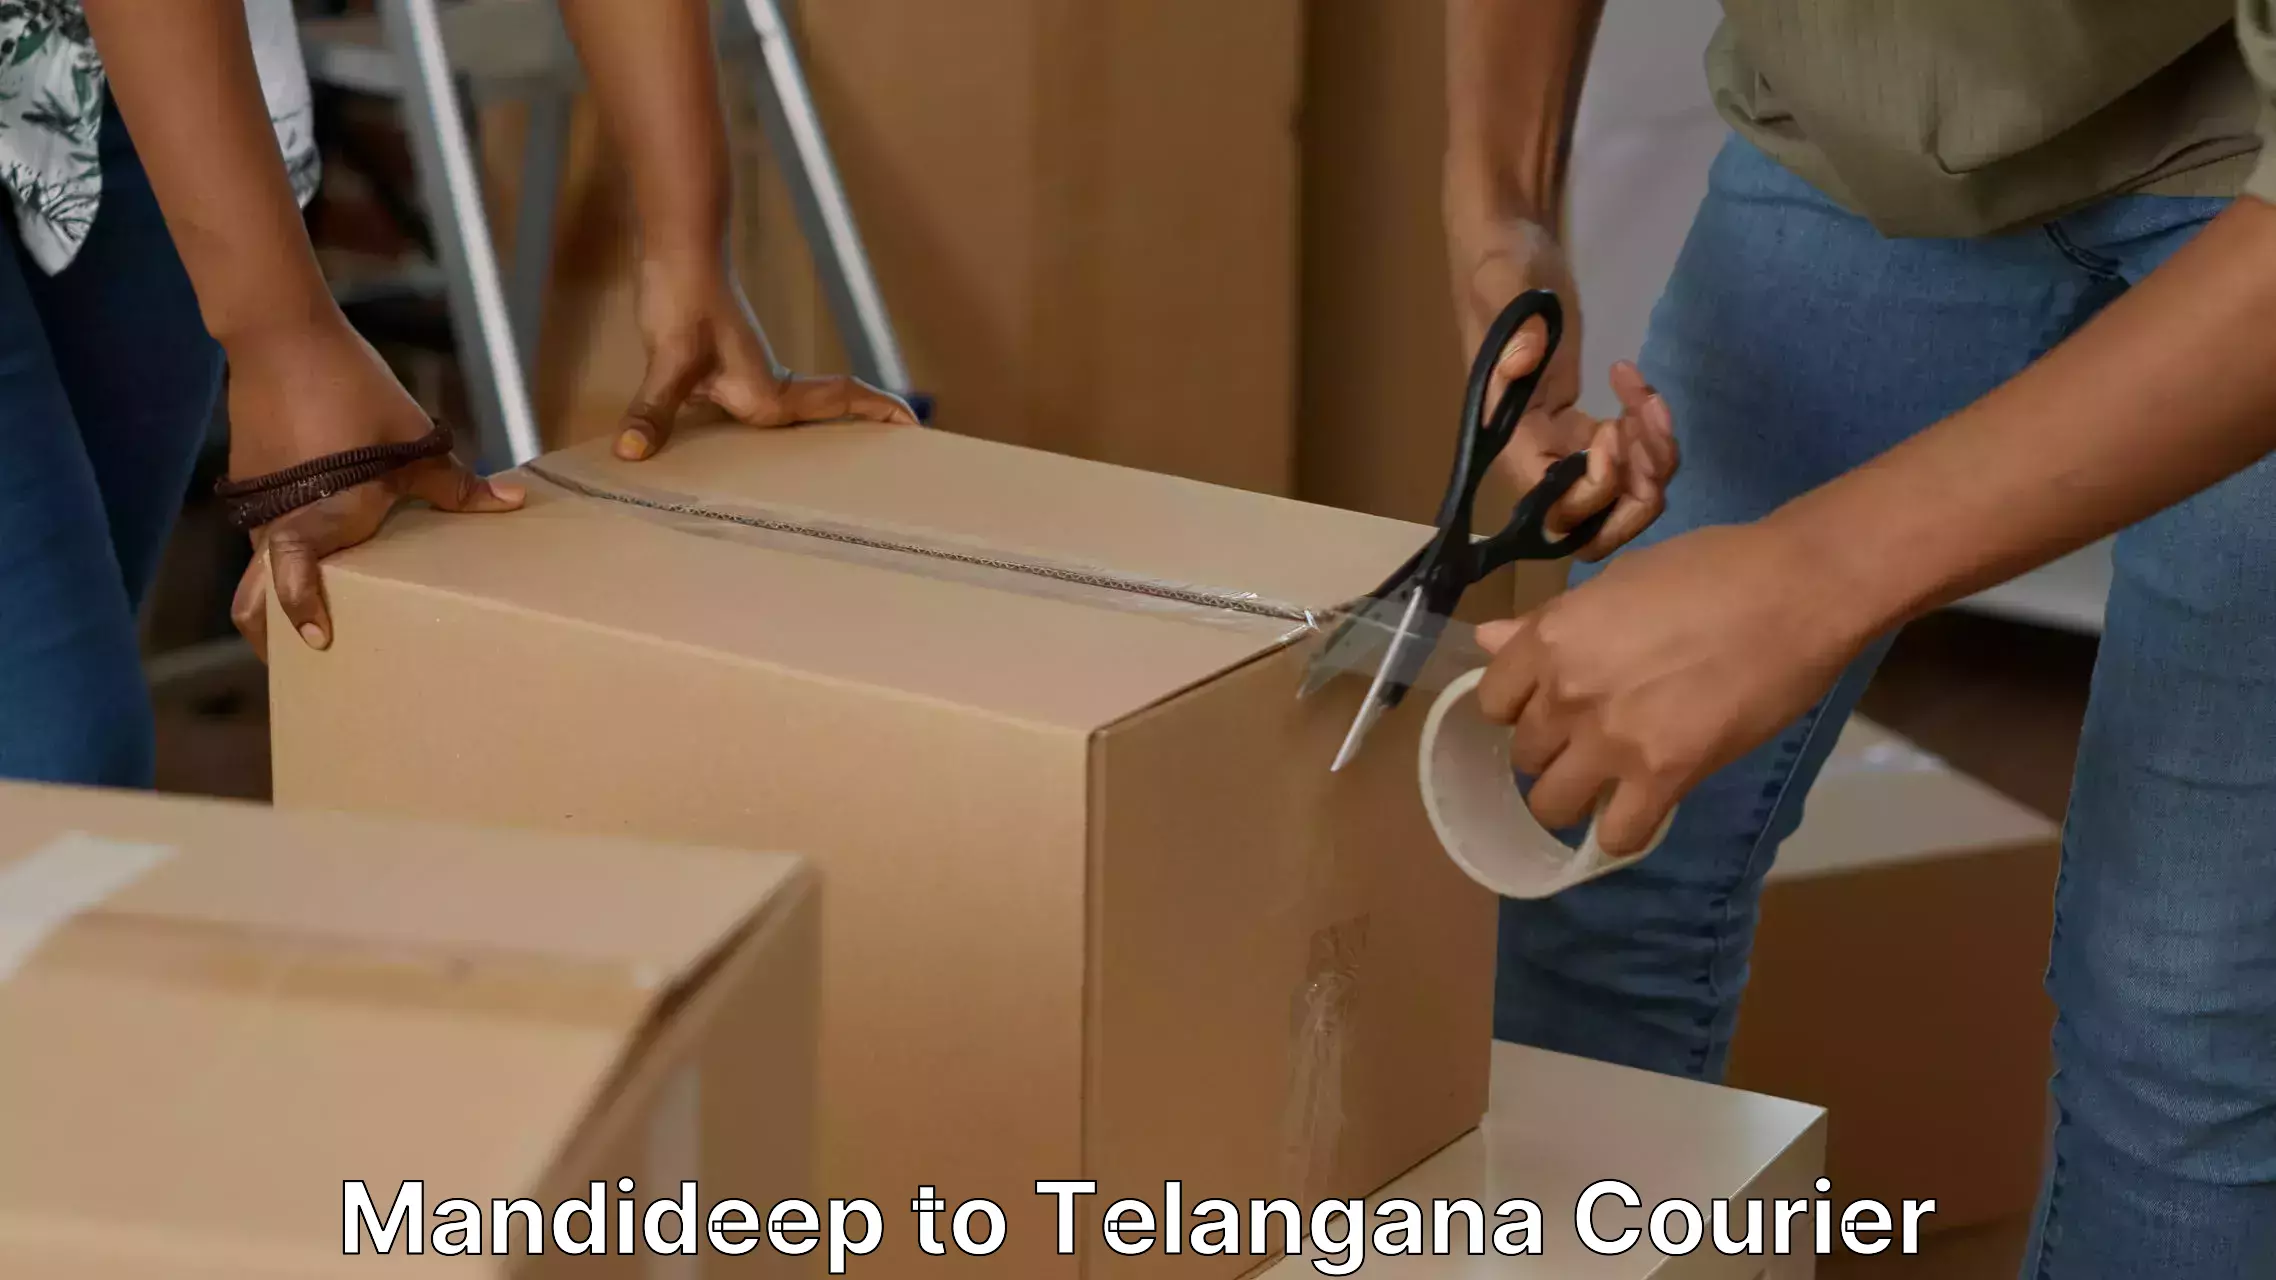 Furniture moving experts in Mandideep to Hyderabad